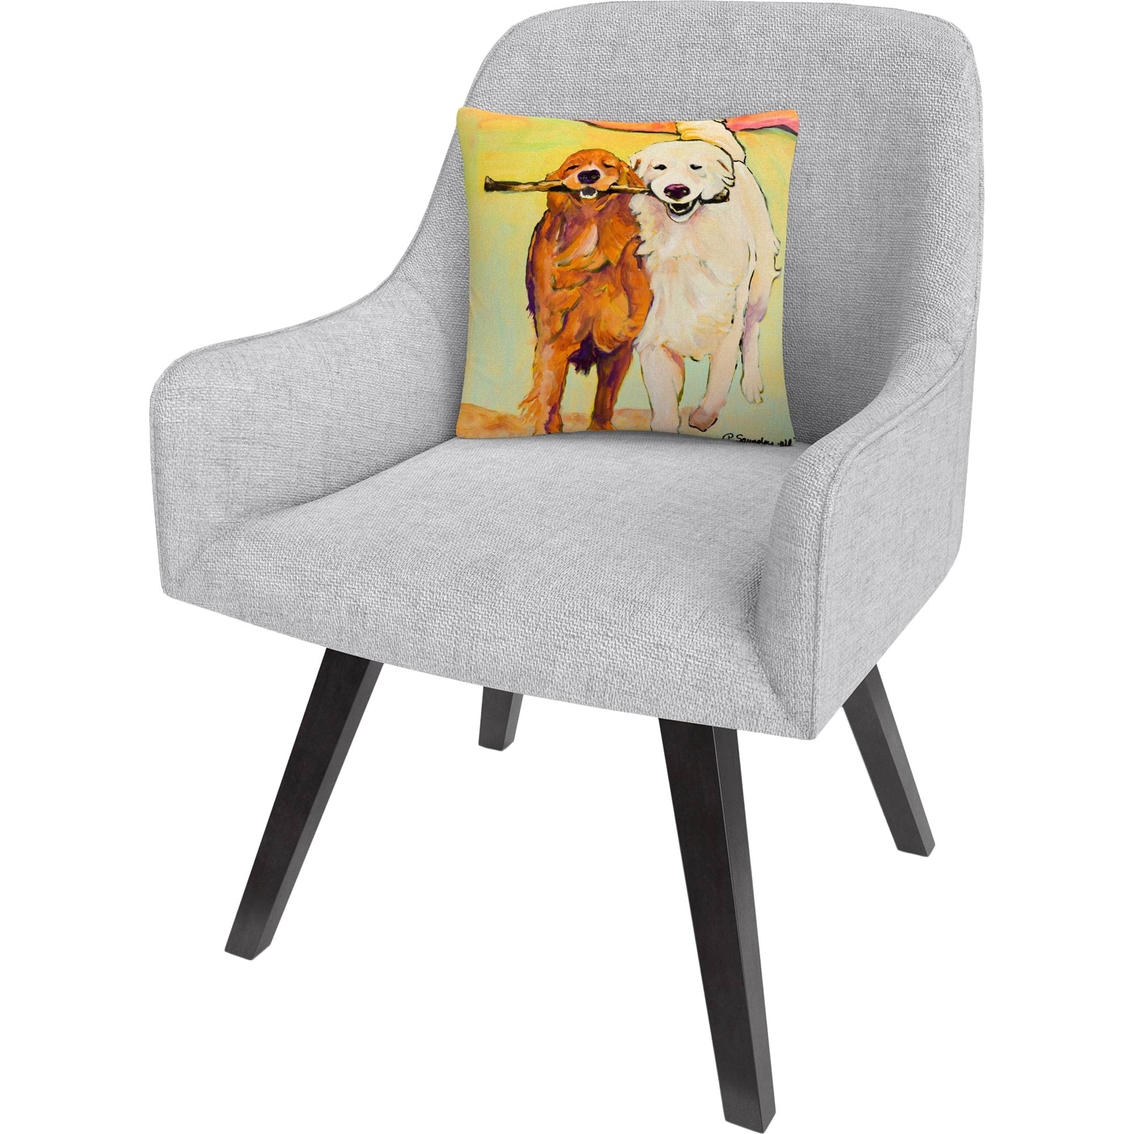 Trademark Fine Art Pat Saunders White Stick With Me Decorative Throw Pillow - Image 2 of 3